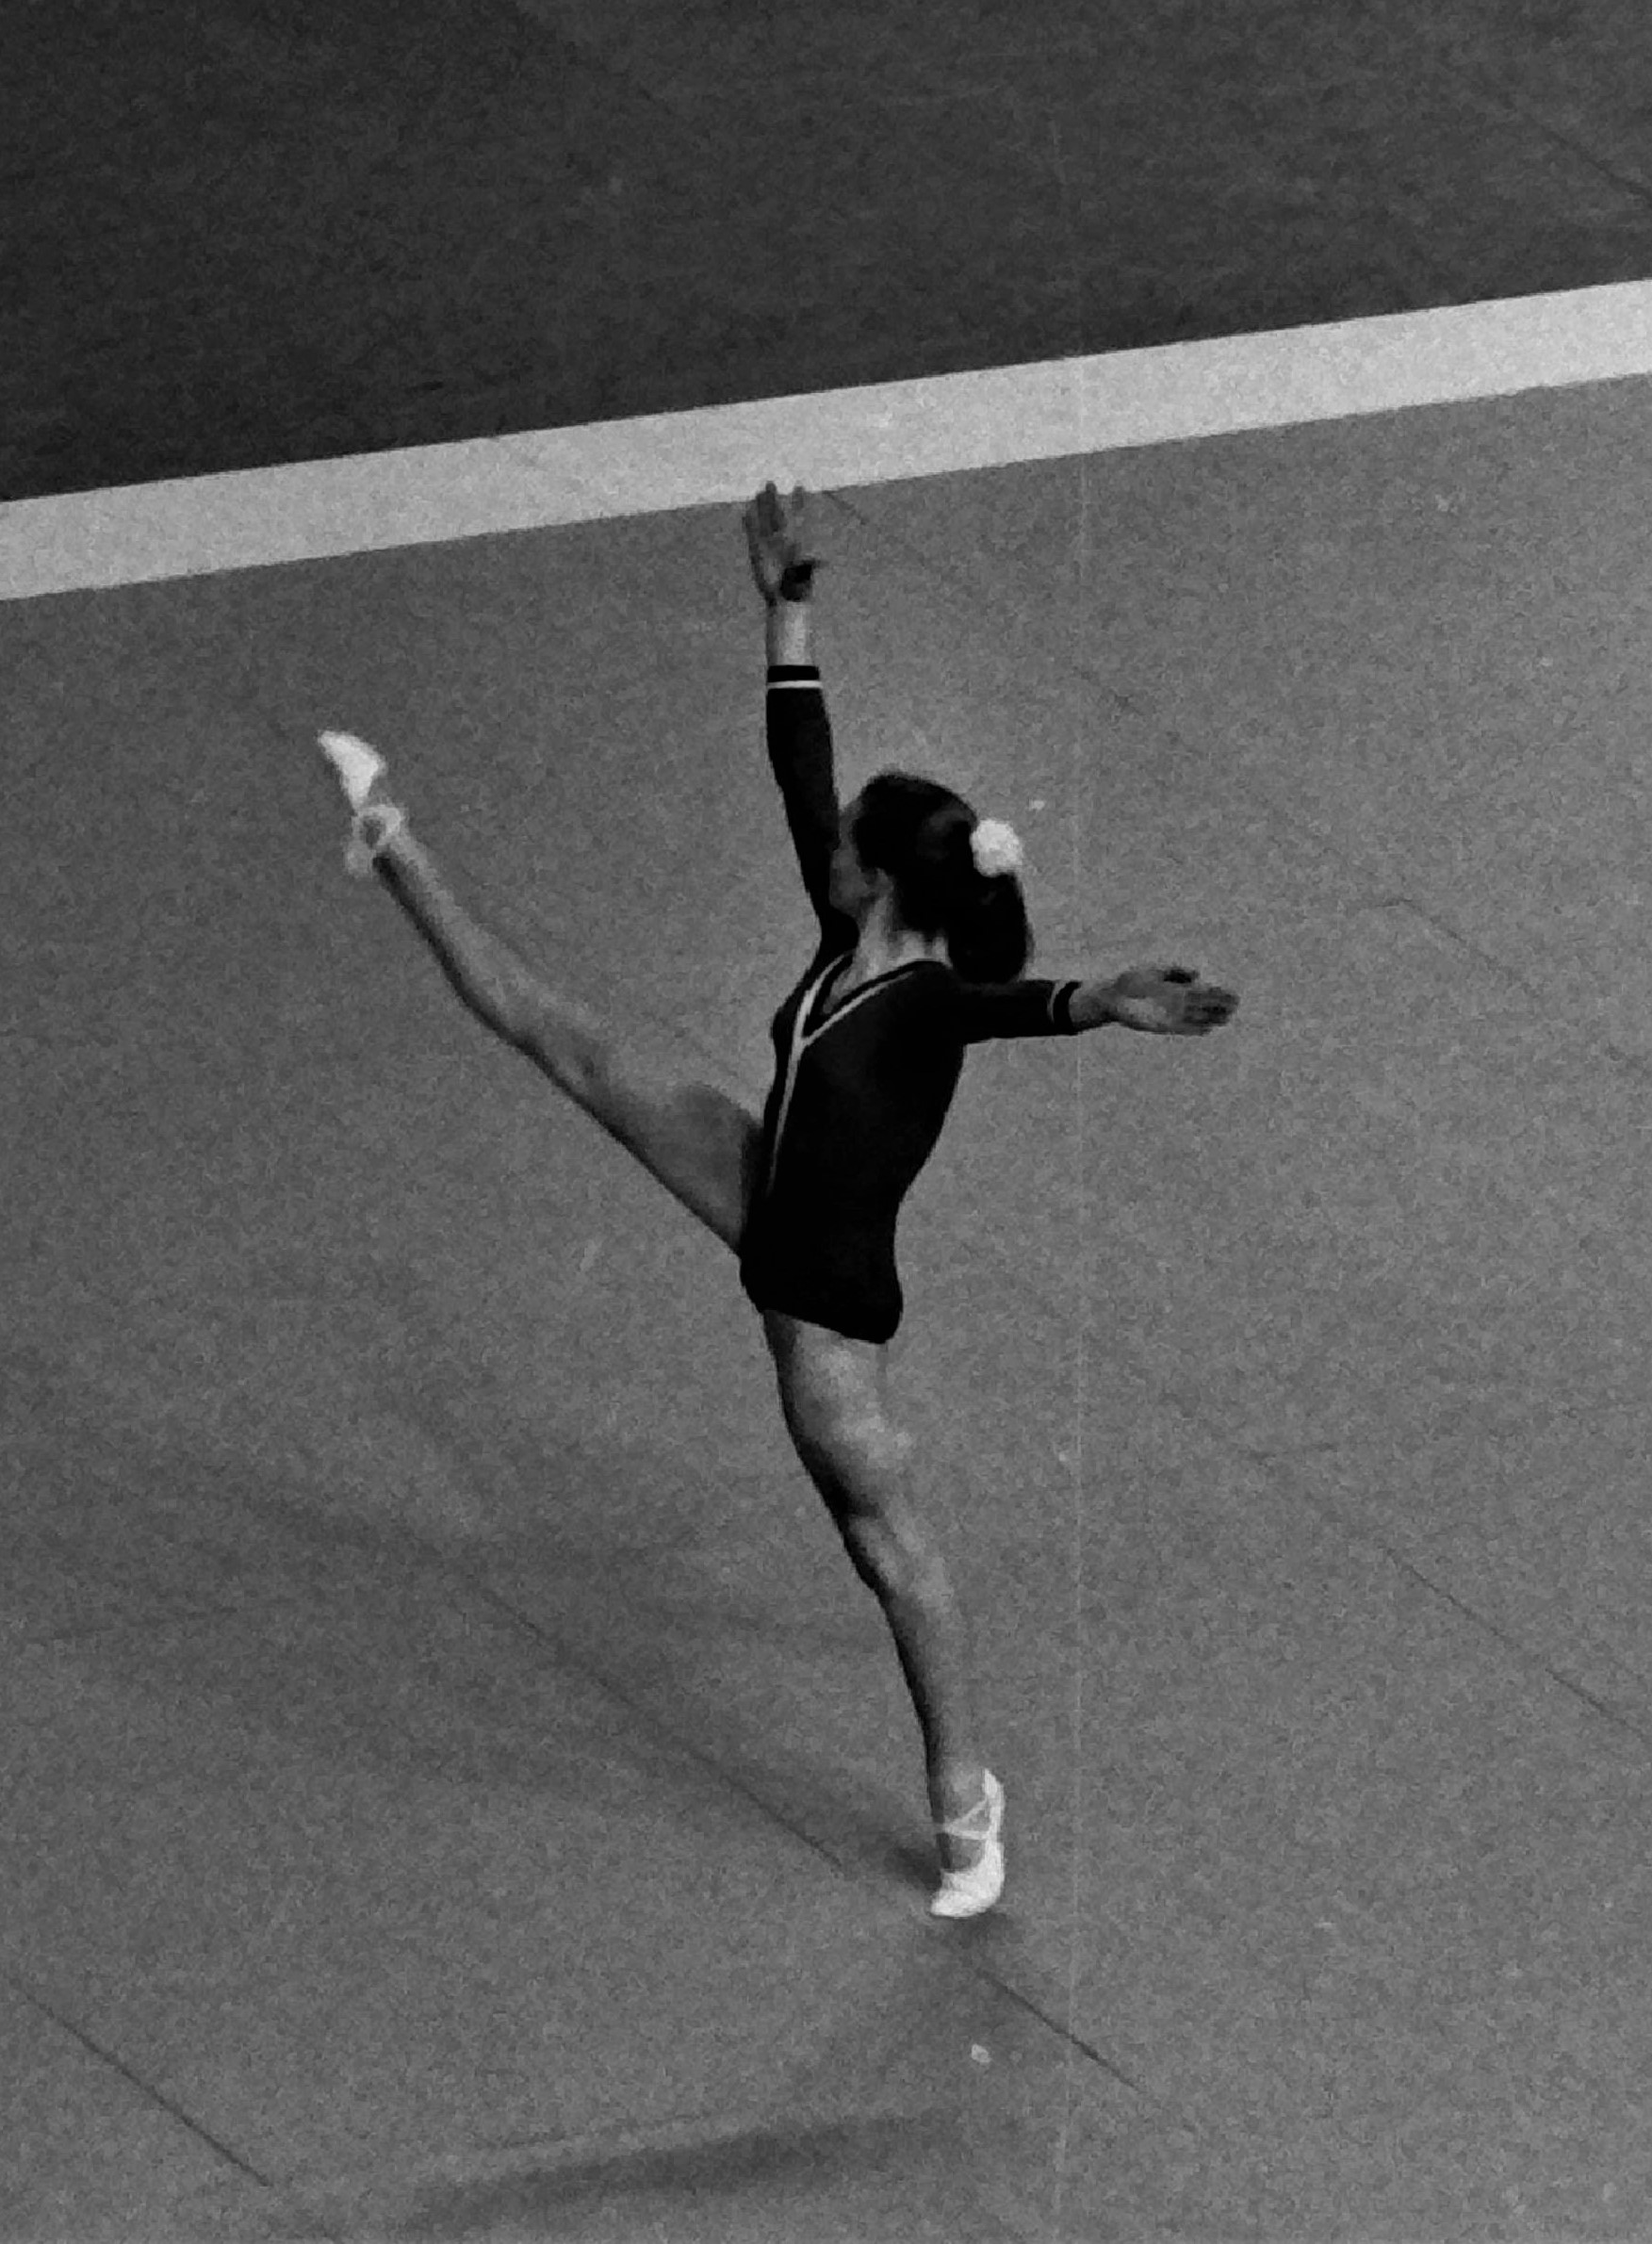 Barbara Slater competing at the Montreal Olympics in 1976